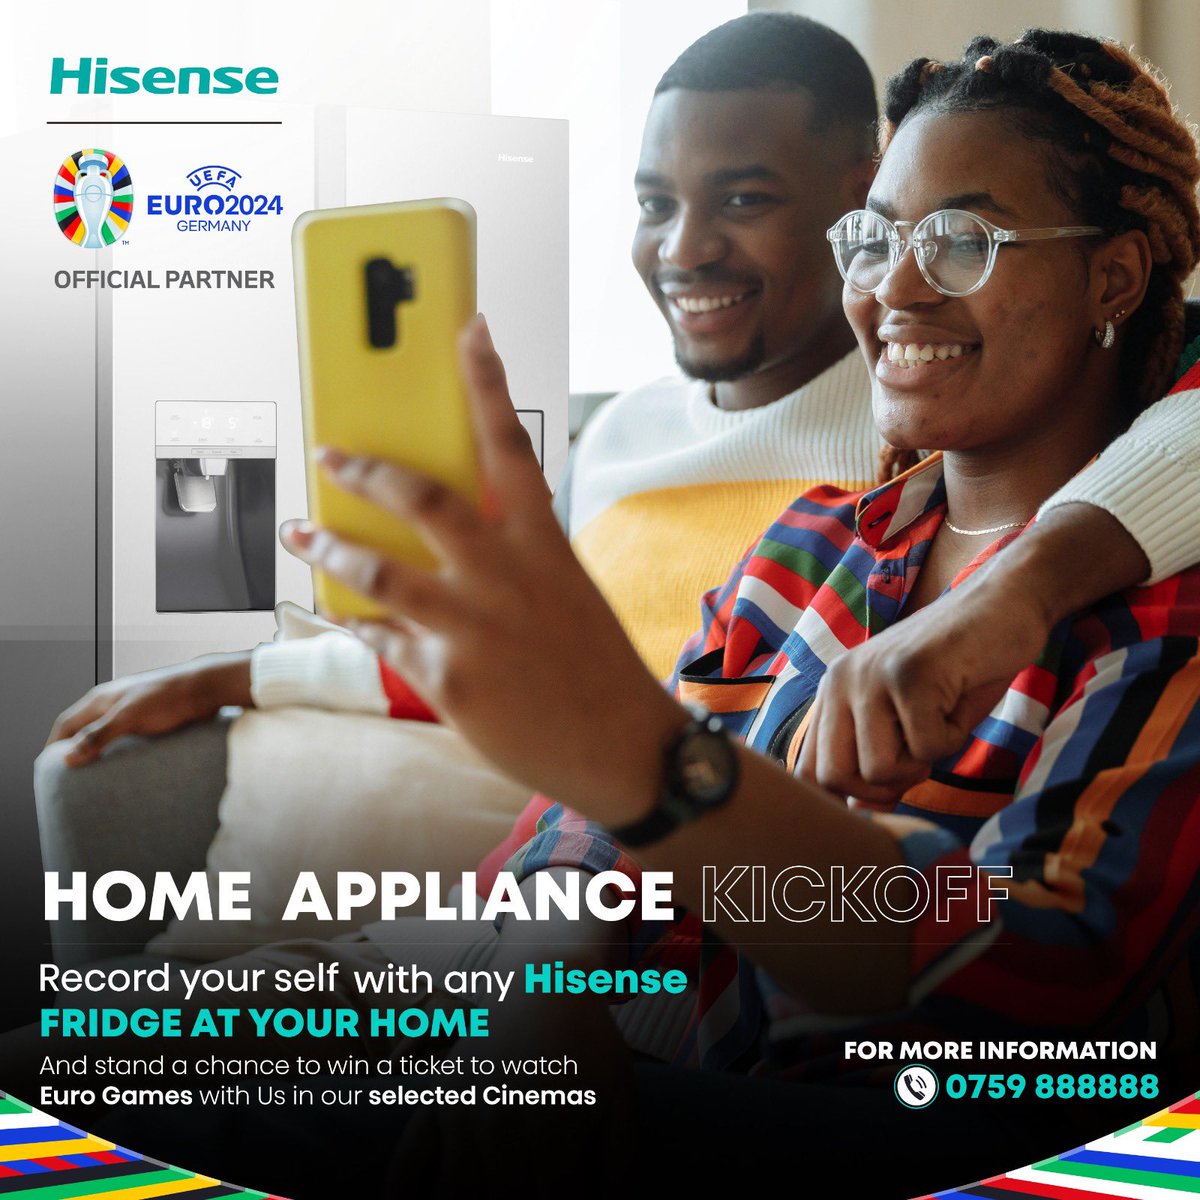 A simple selfie with any Hisense product and you could WIN lots of prizes.🤗 #EURO2024 | #HisenseEuroChallenge